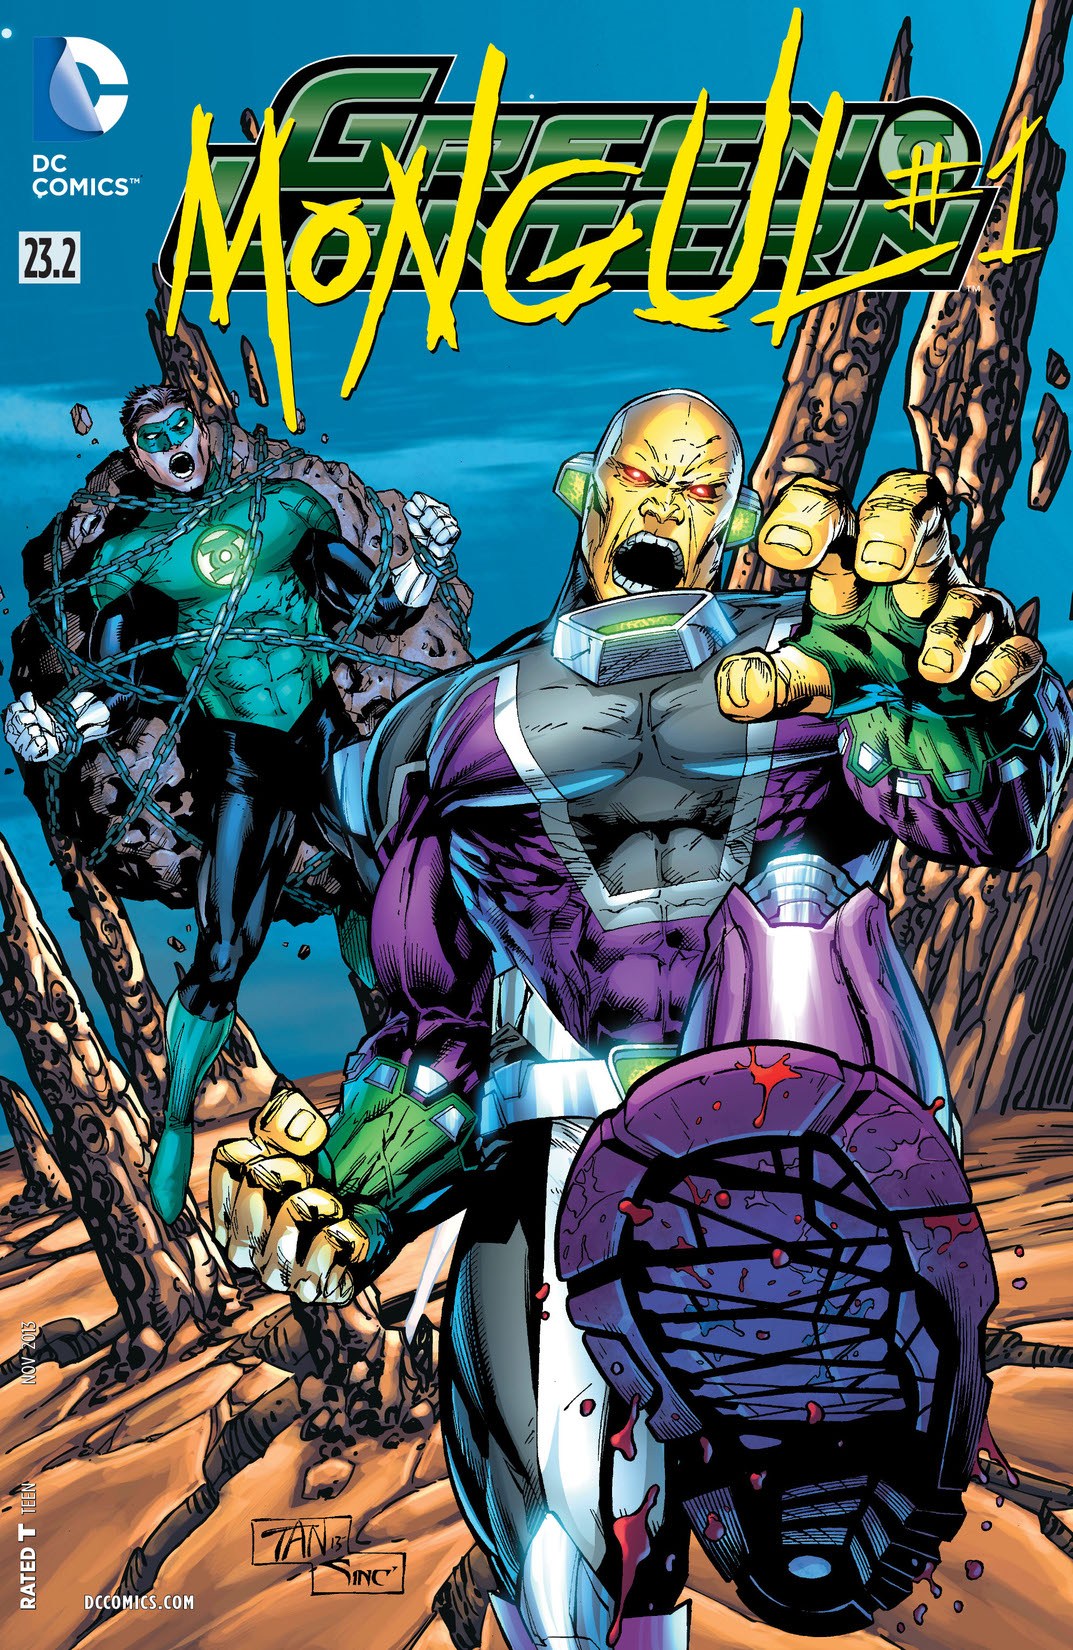 Green Lantern feat Mongul (2013-) #23.2 preview images